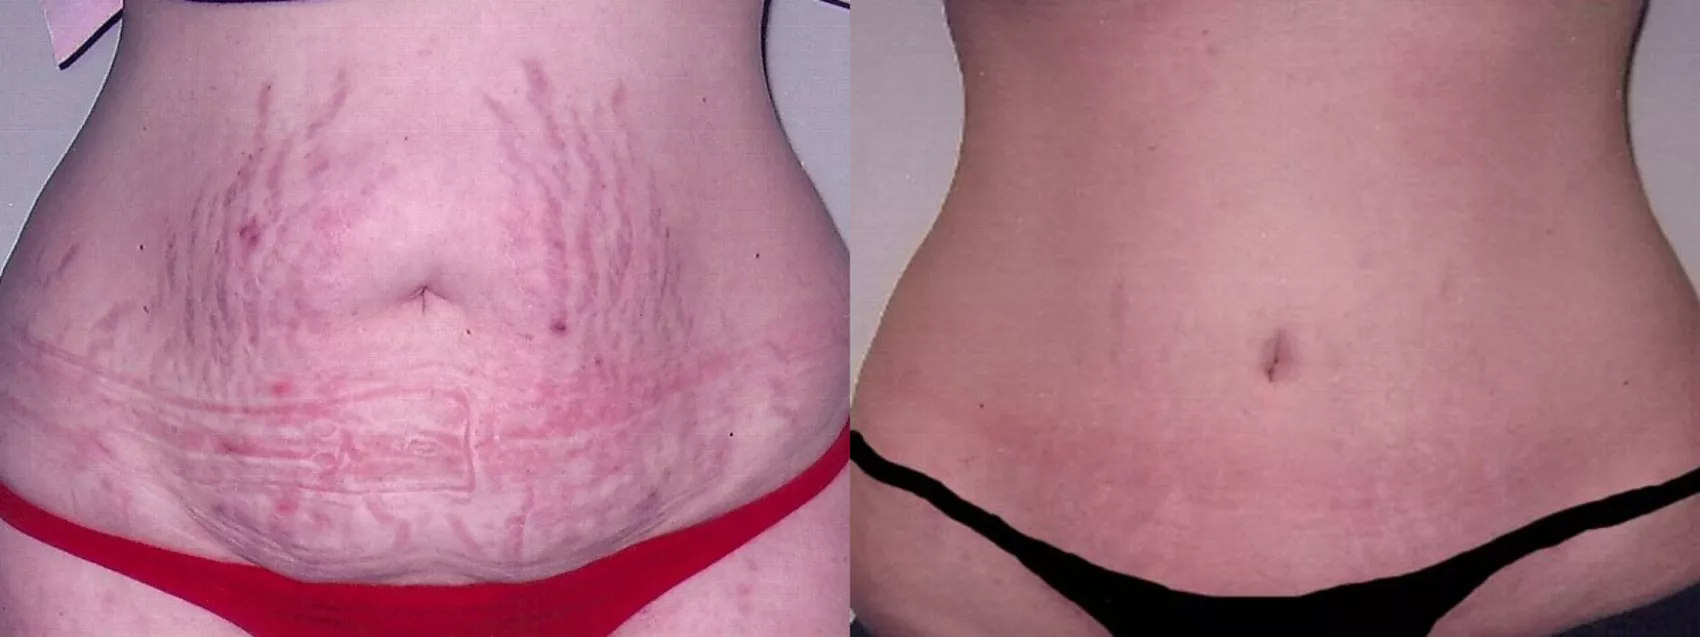 Tummy Tuck Before And After